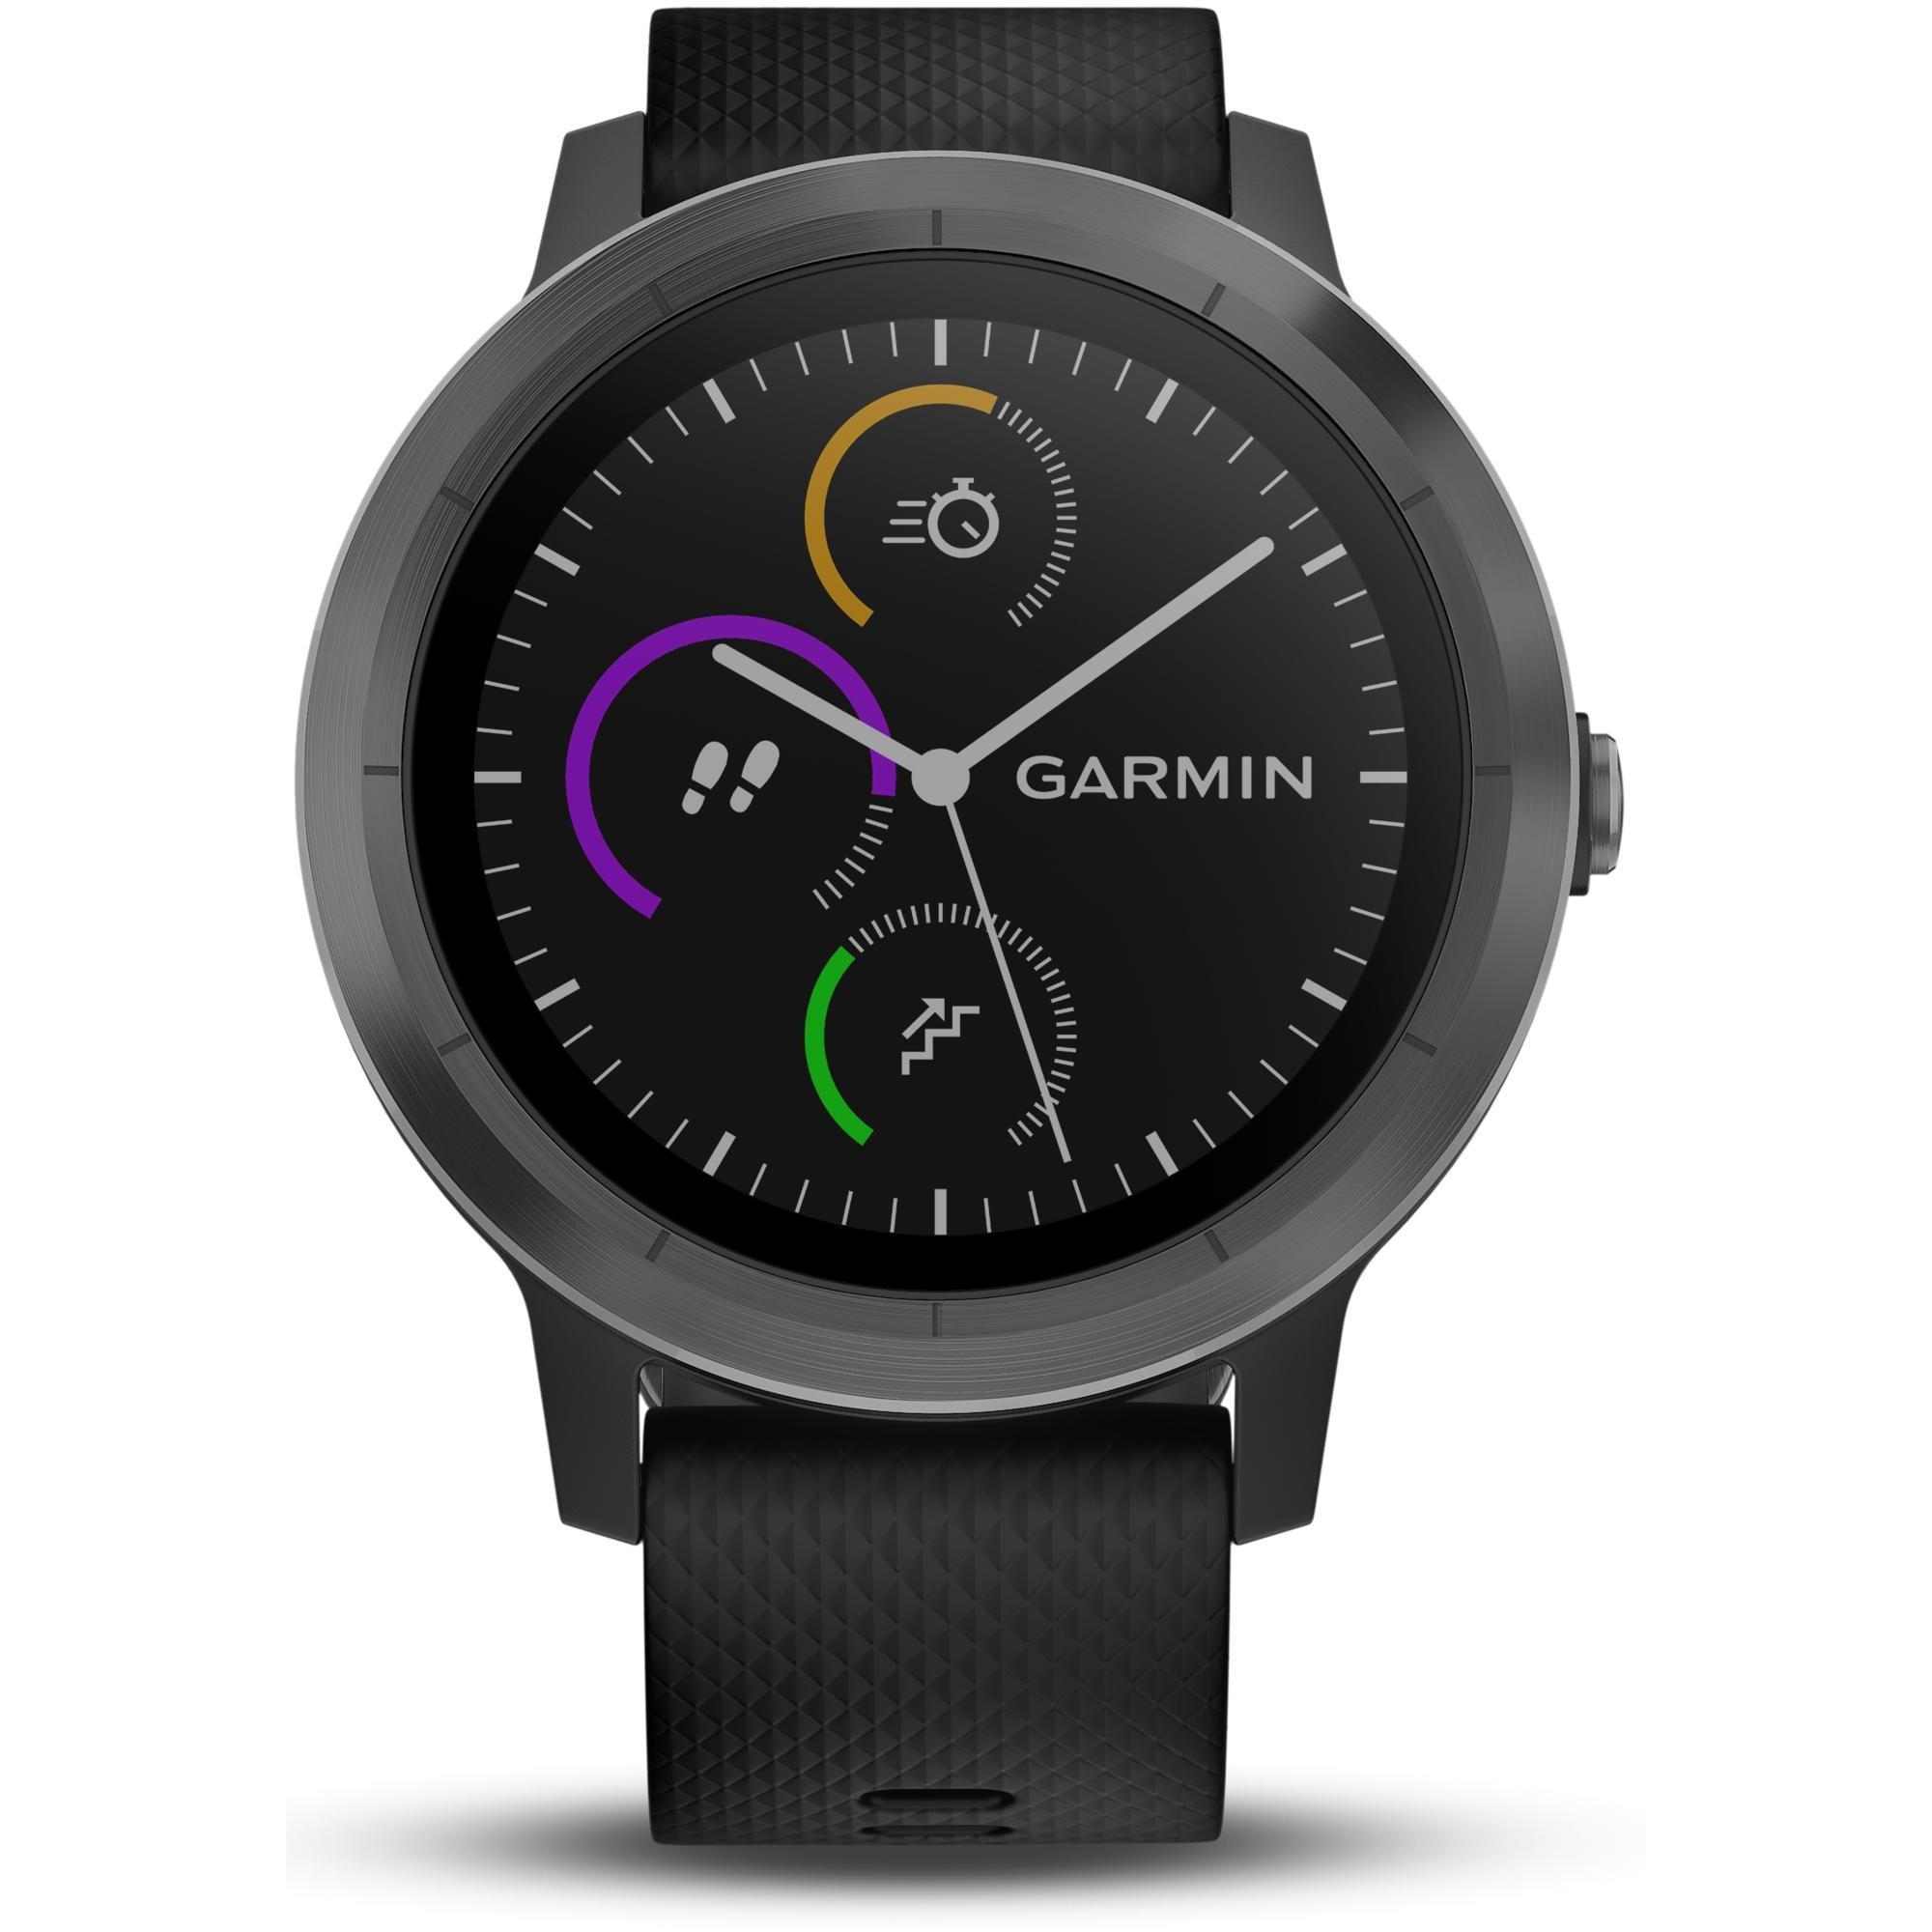 Smartwatch with wrist-based HRM 